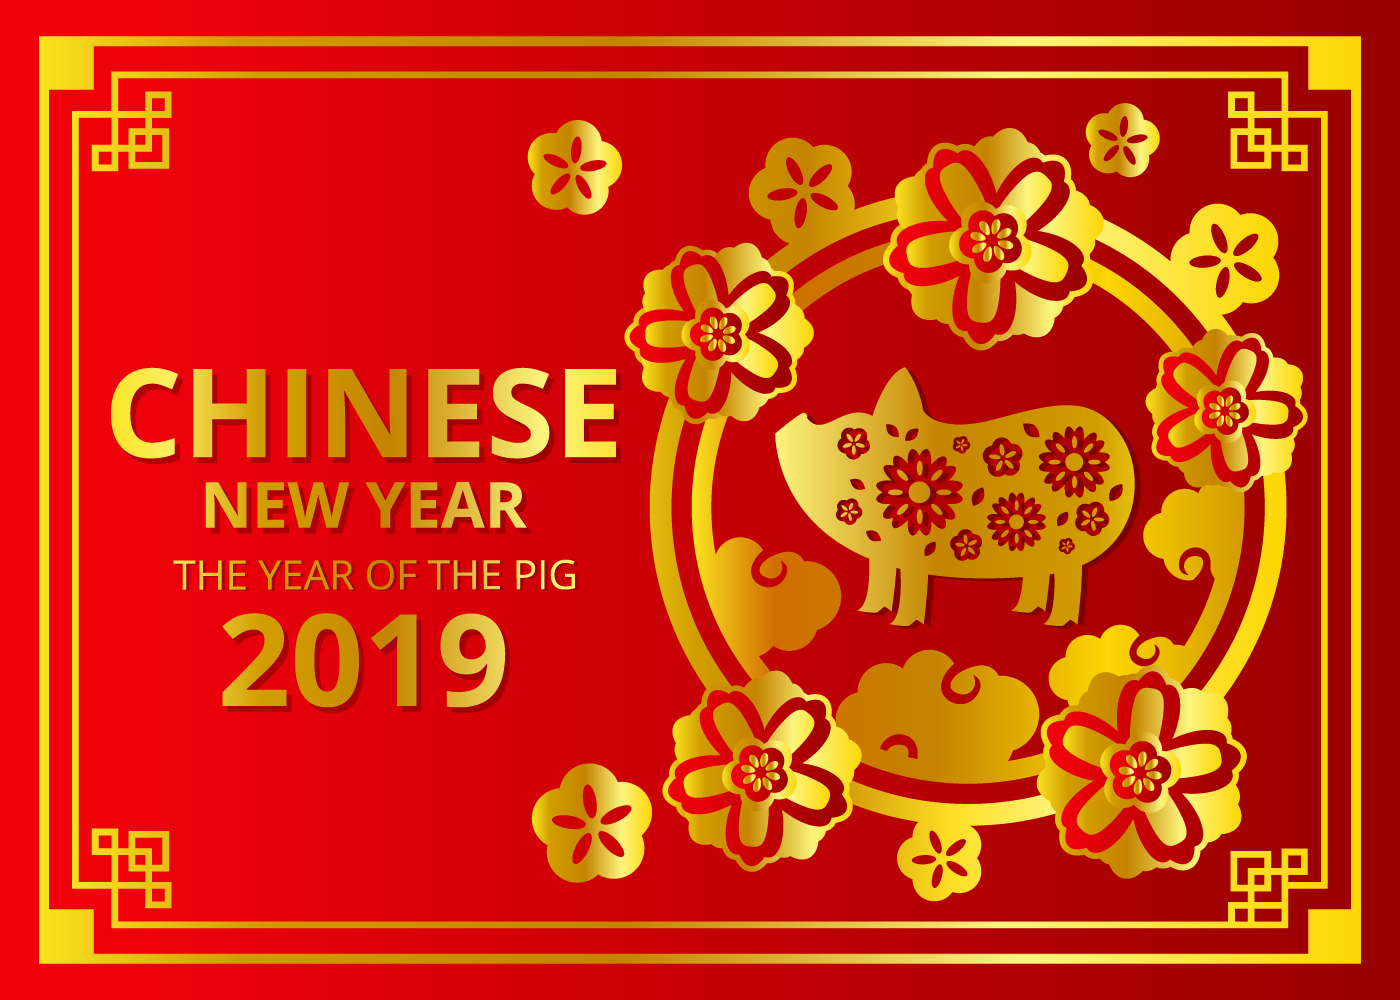 2019 Chinese New Year Vector - Download Free Vectors, Clipart Graphics & Vector Art1400 x 1000